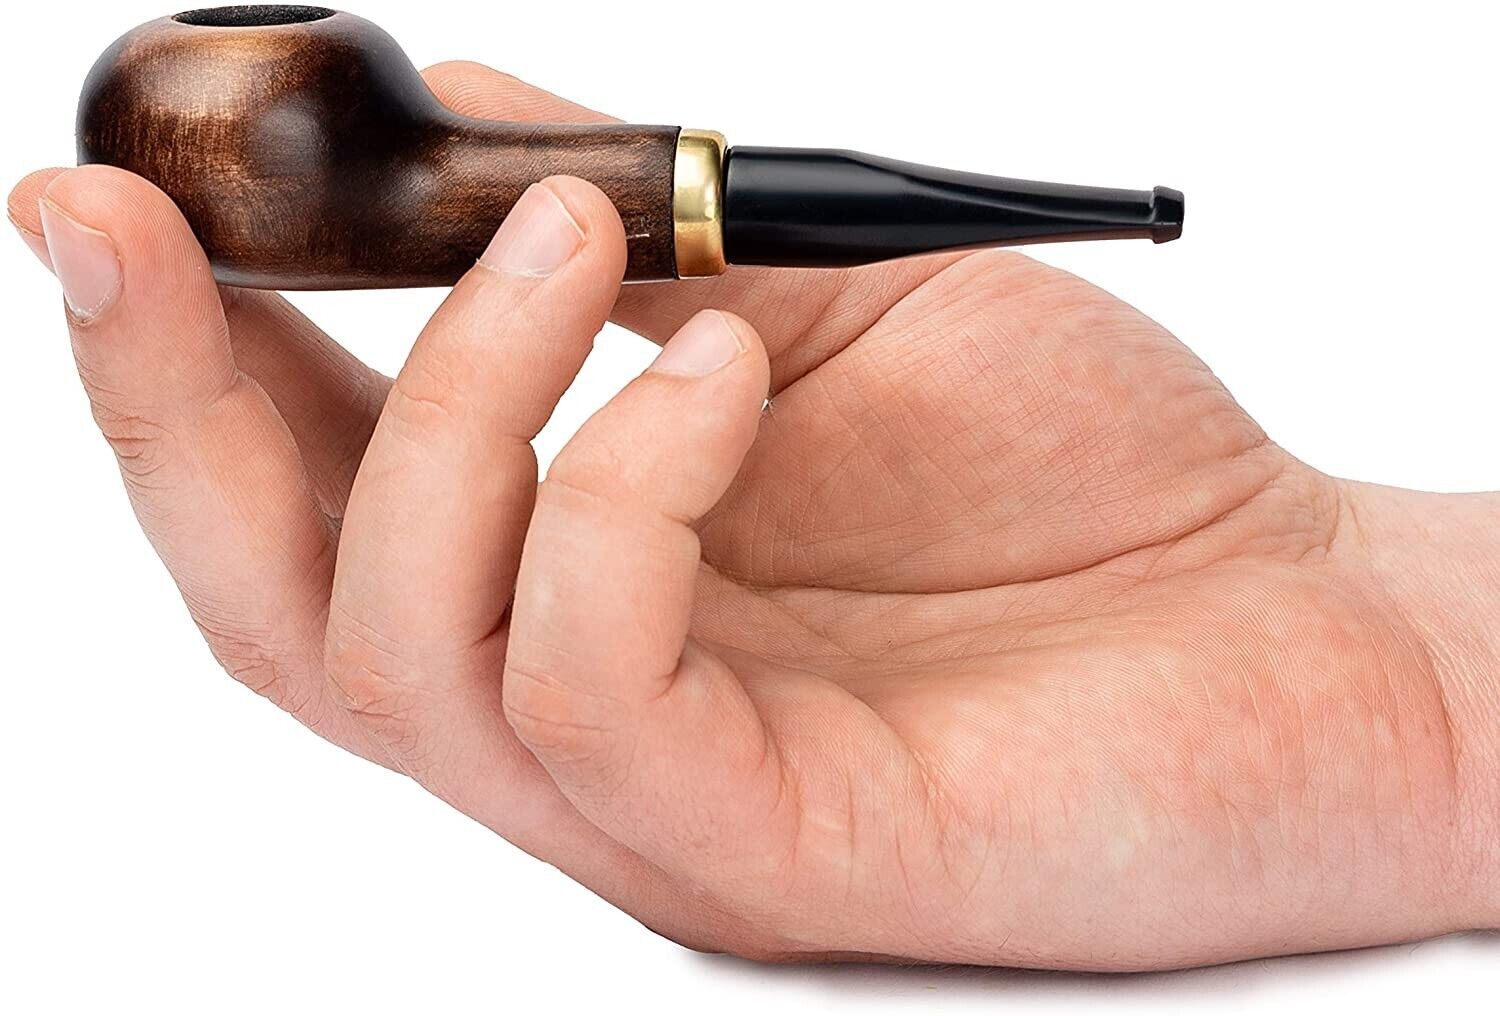 Dr. Watson - Small Wooden Tobacco Pipe Mini Hand Carved Comes with Pouch Brown